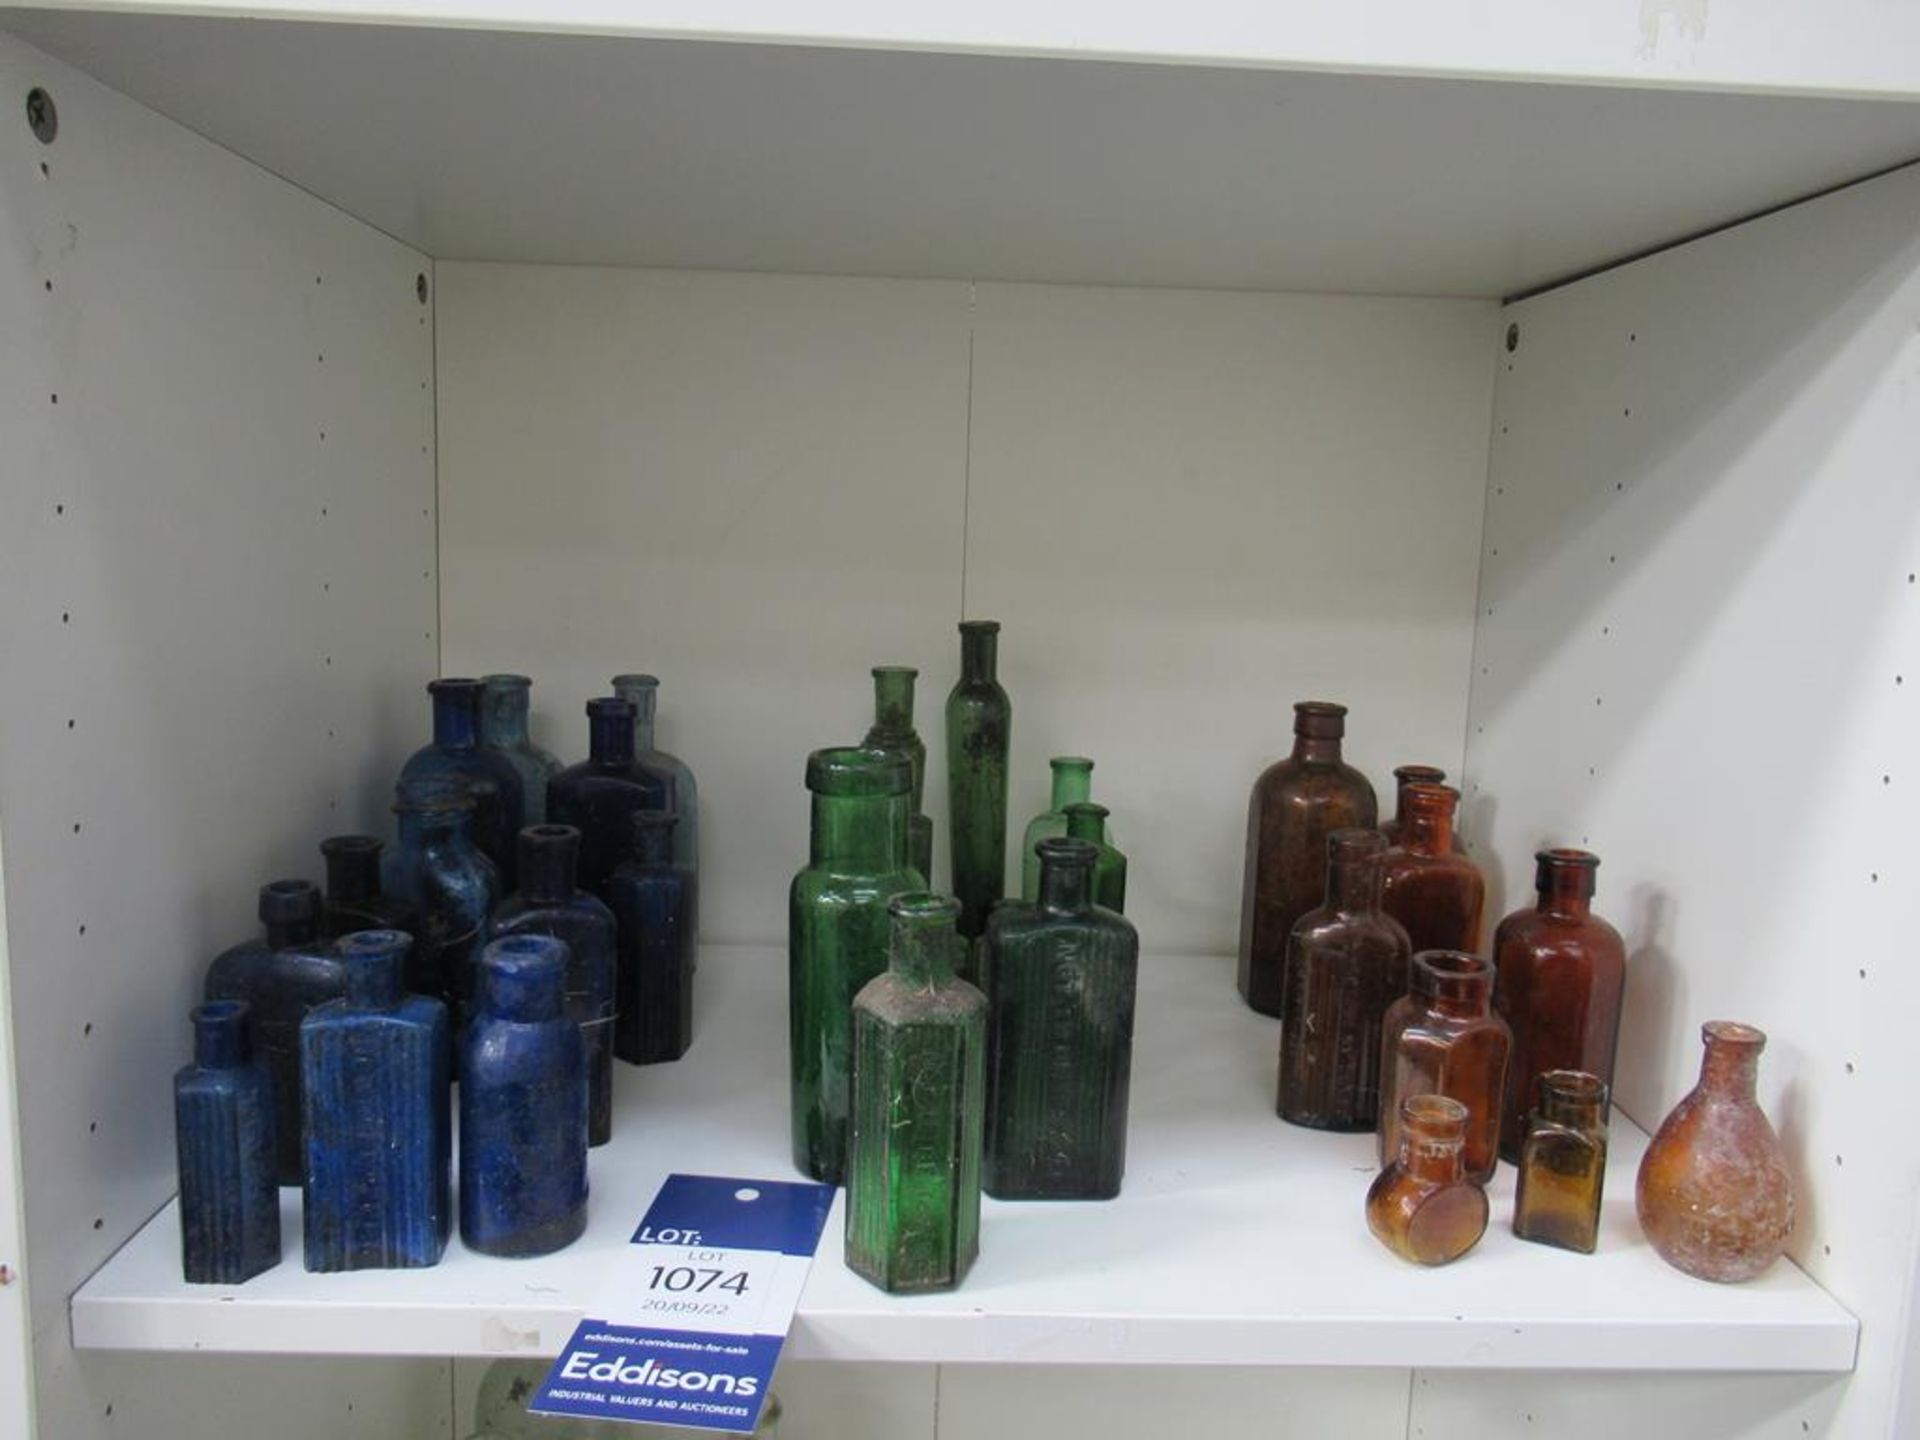 Shelf of Assorted Cobalt Green and Amber Bottles - many saying 'not to be taken'